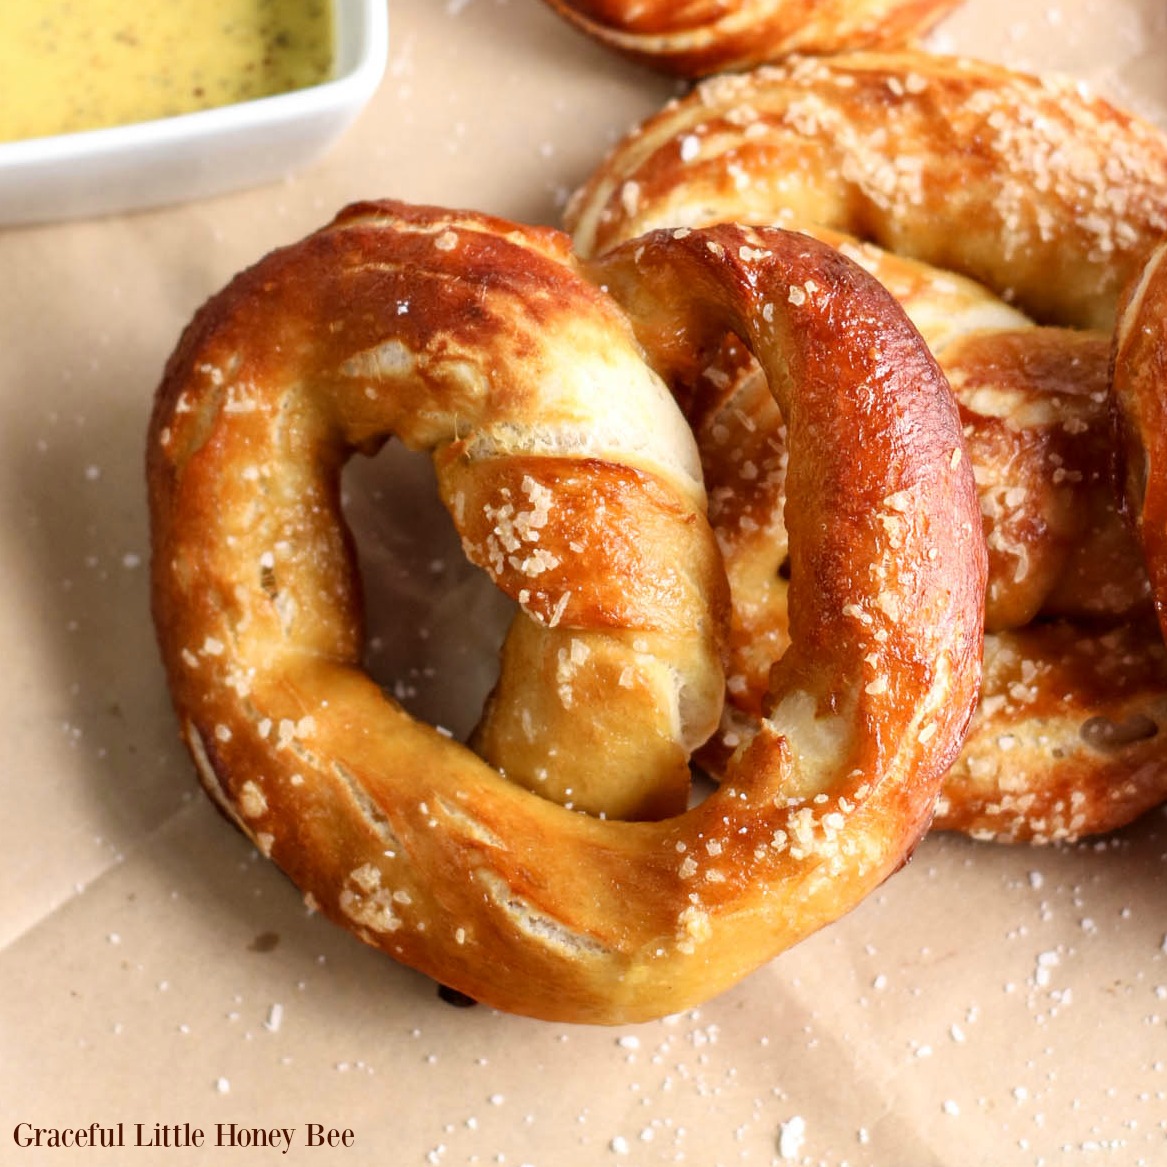 Finished baked pretzels with mustard dipping sauce in the background.